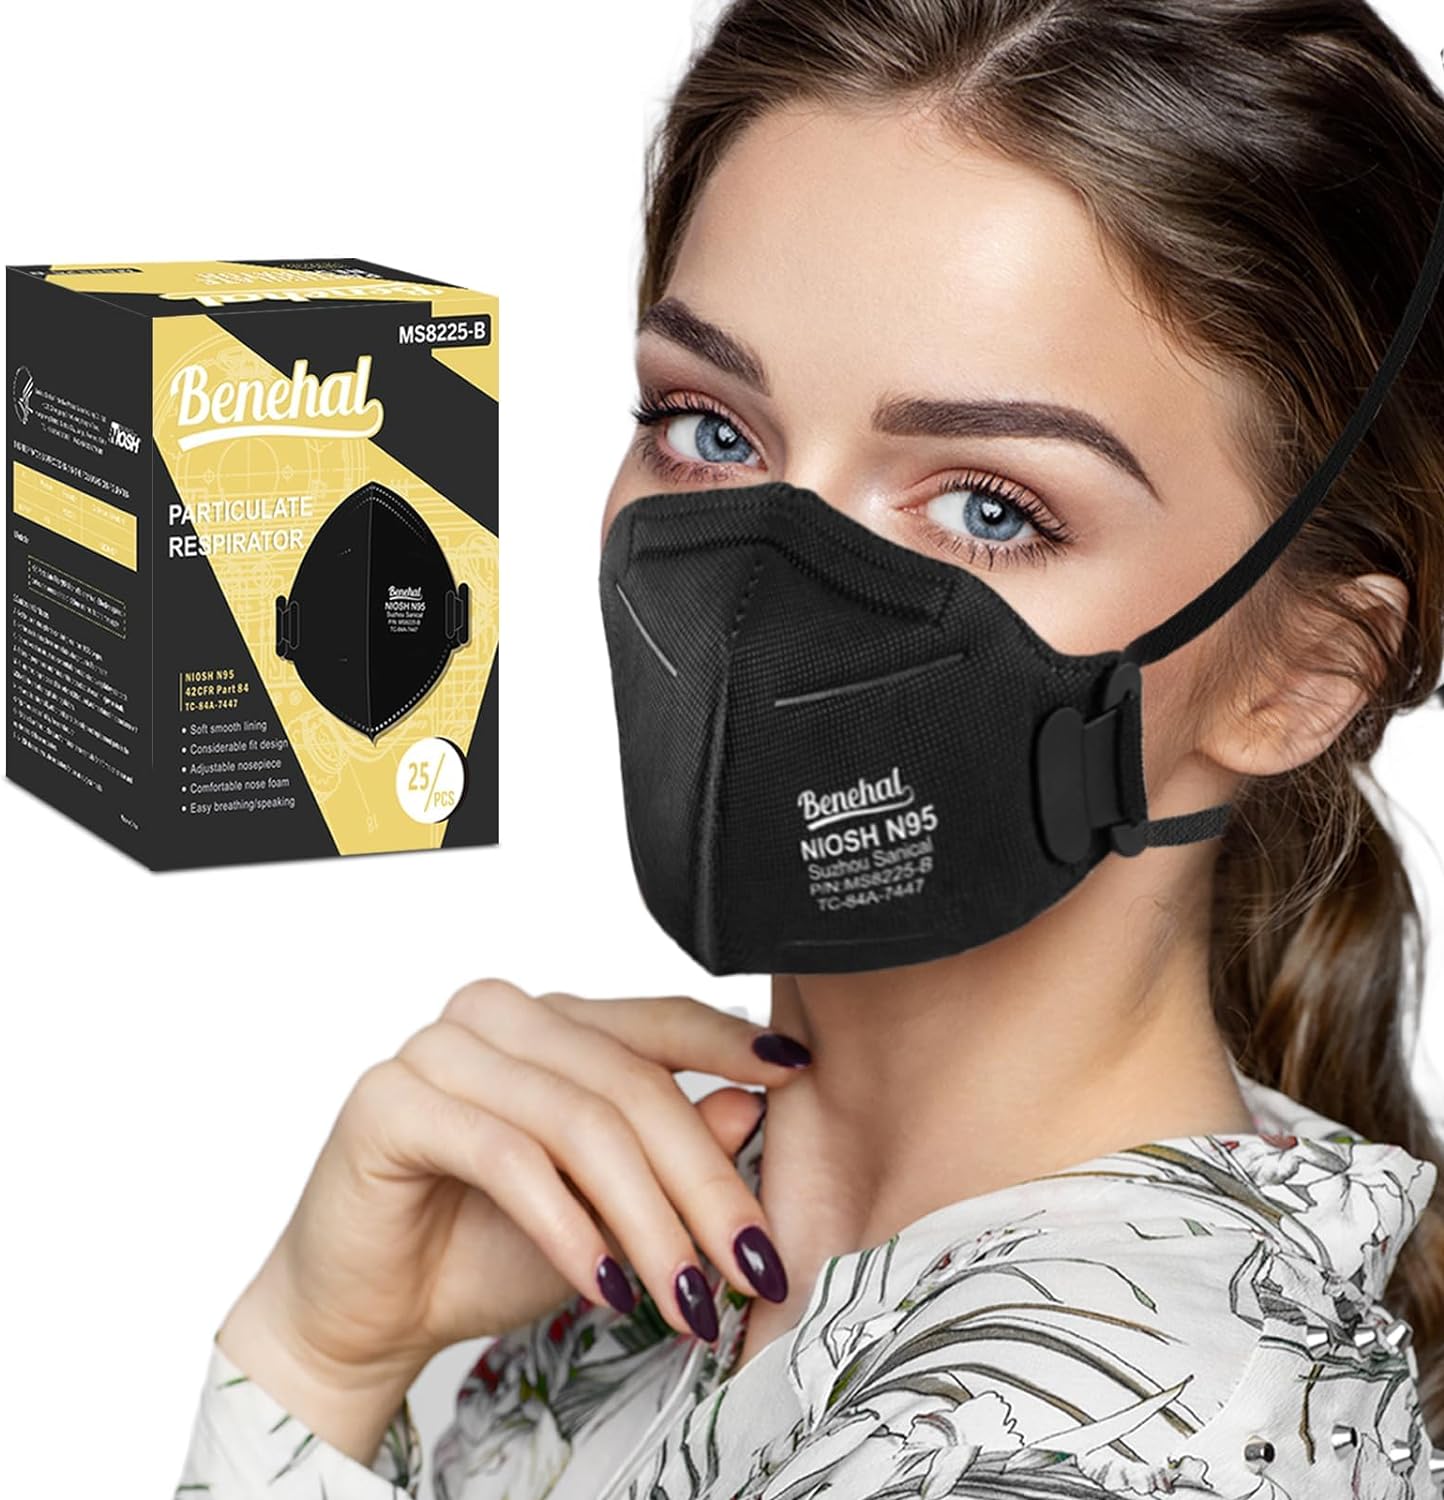 Benehal NIOSH Approved N95 Face Masks Particulate Respirators, Pack of 25 N95 Masks, Individually Wrapped, Black